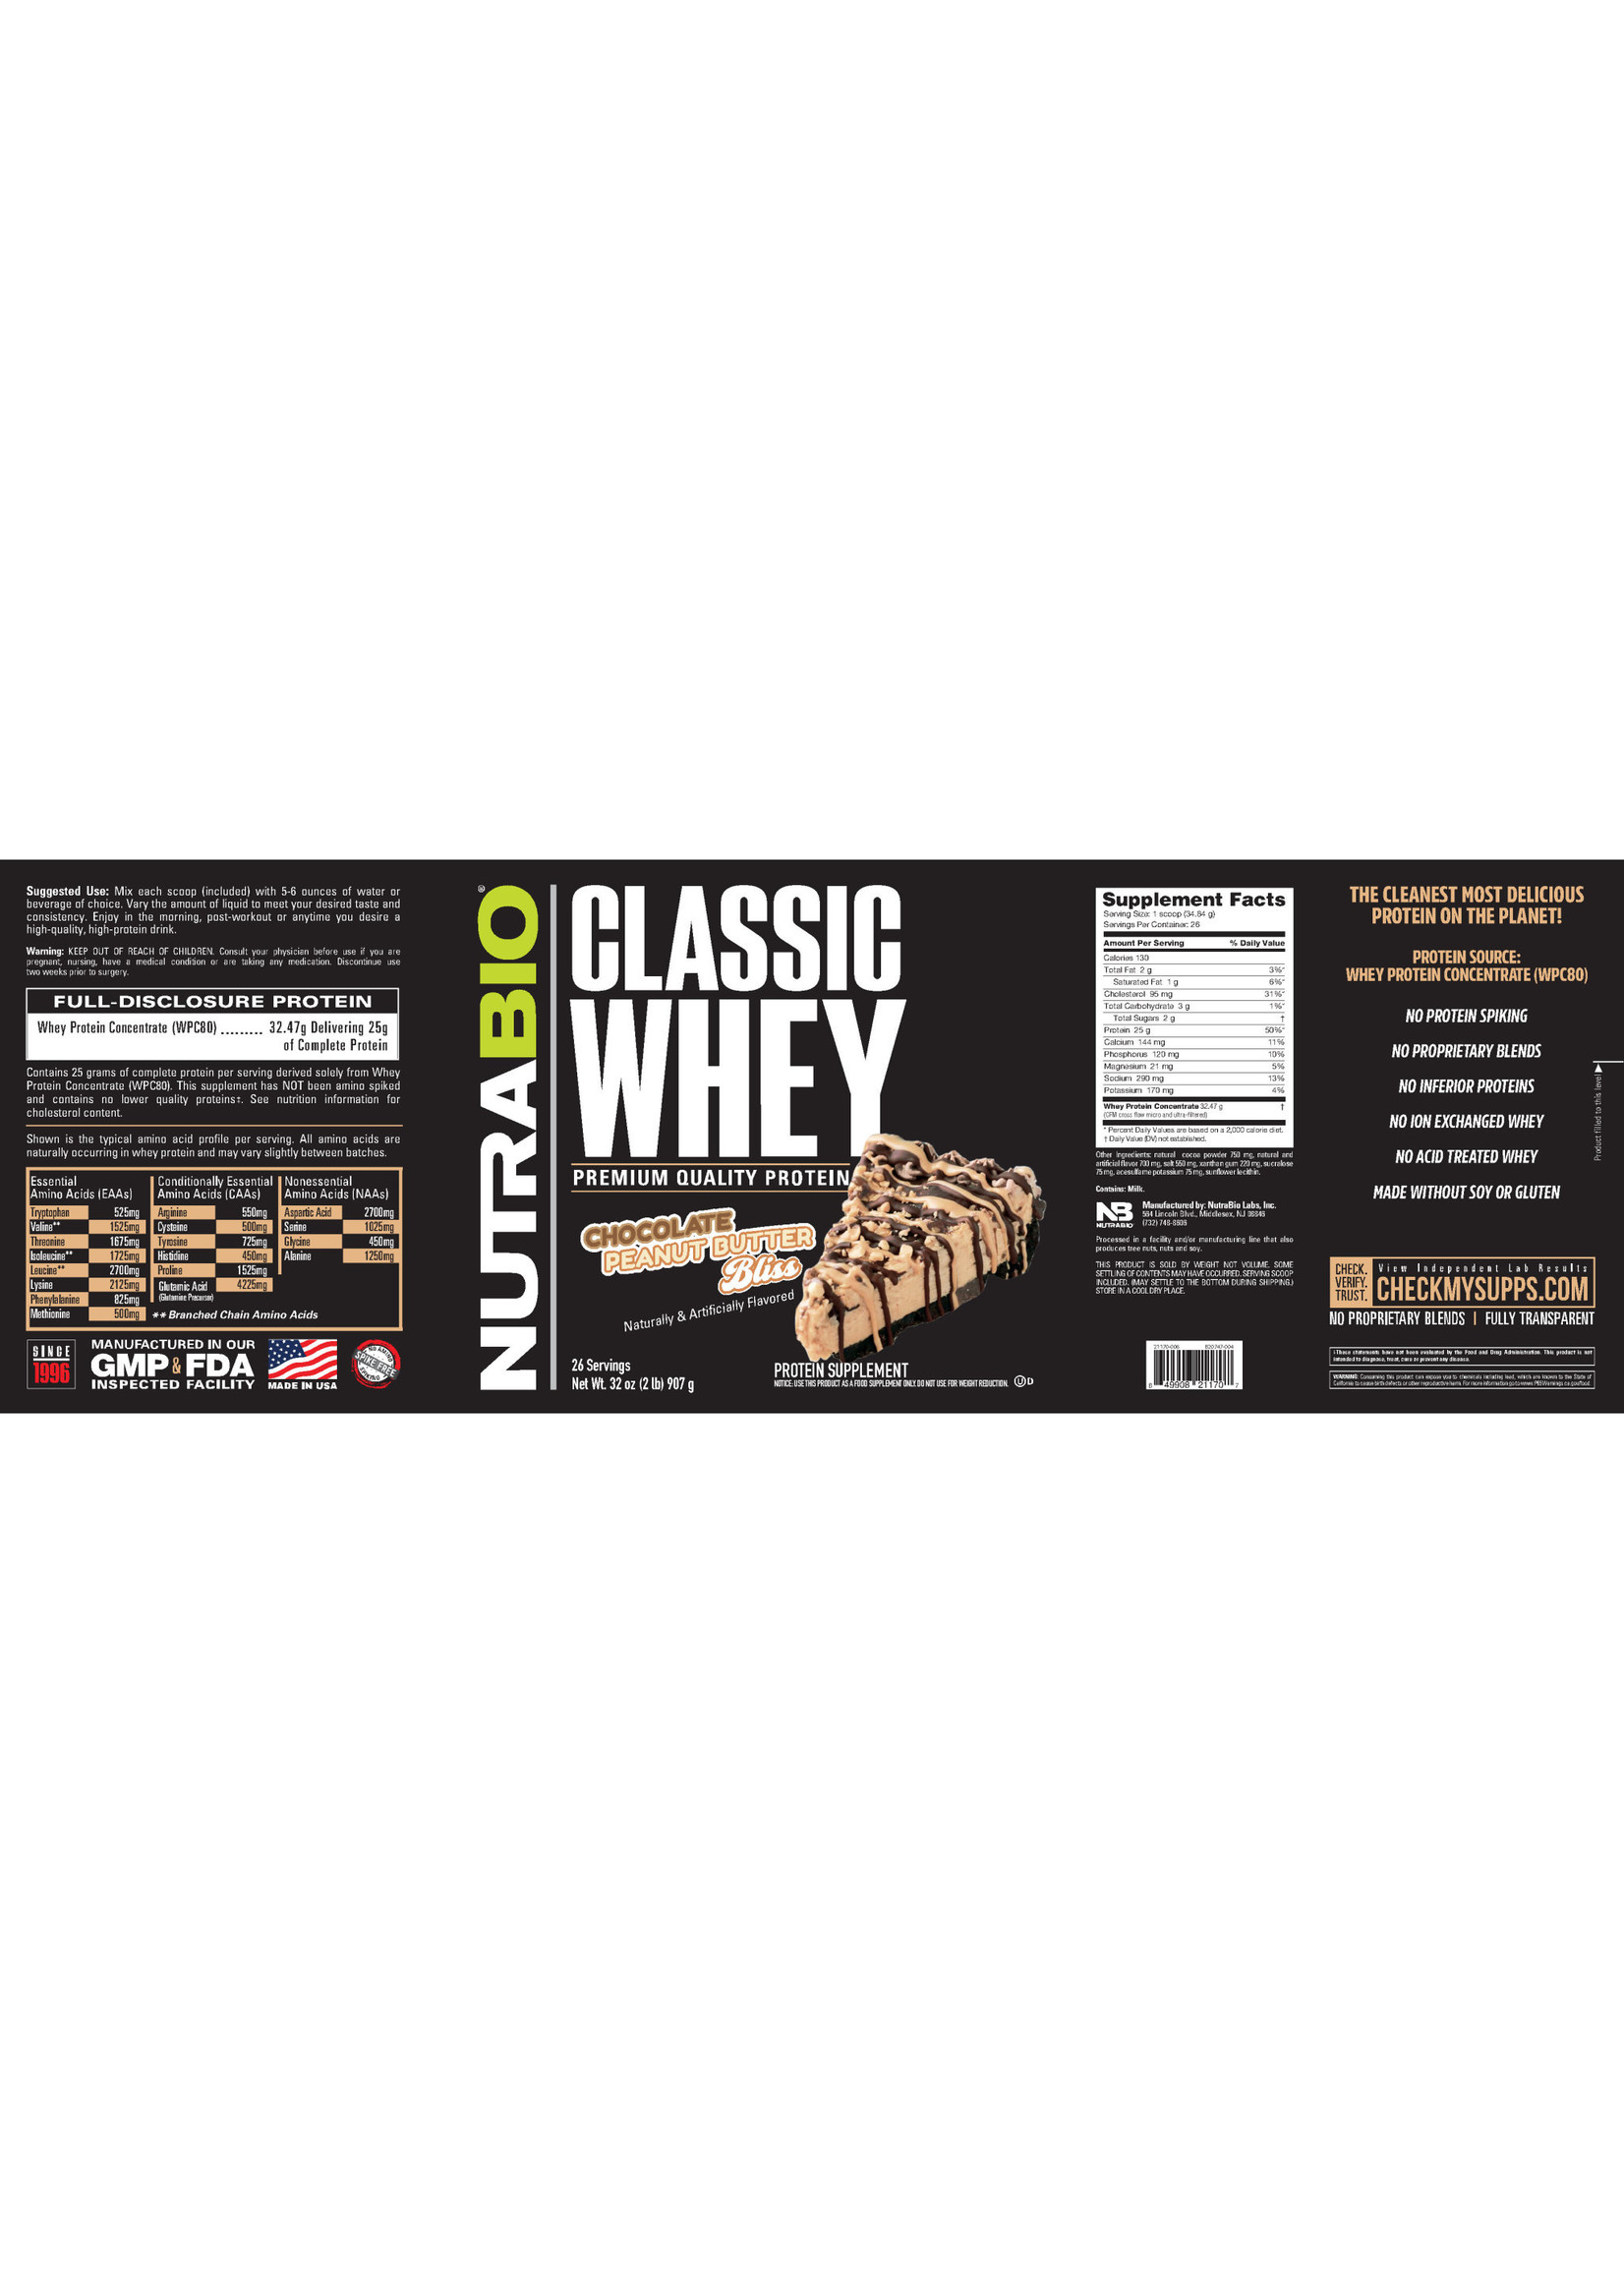 Nutrabio Classic Whey 2lb Chocolate Peanut Butter Bliss